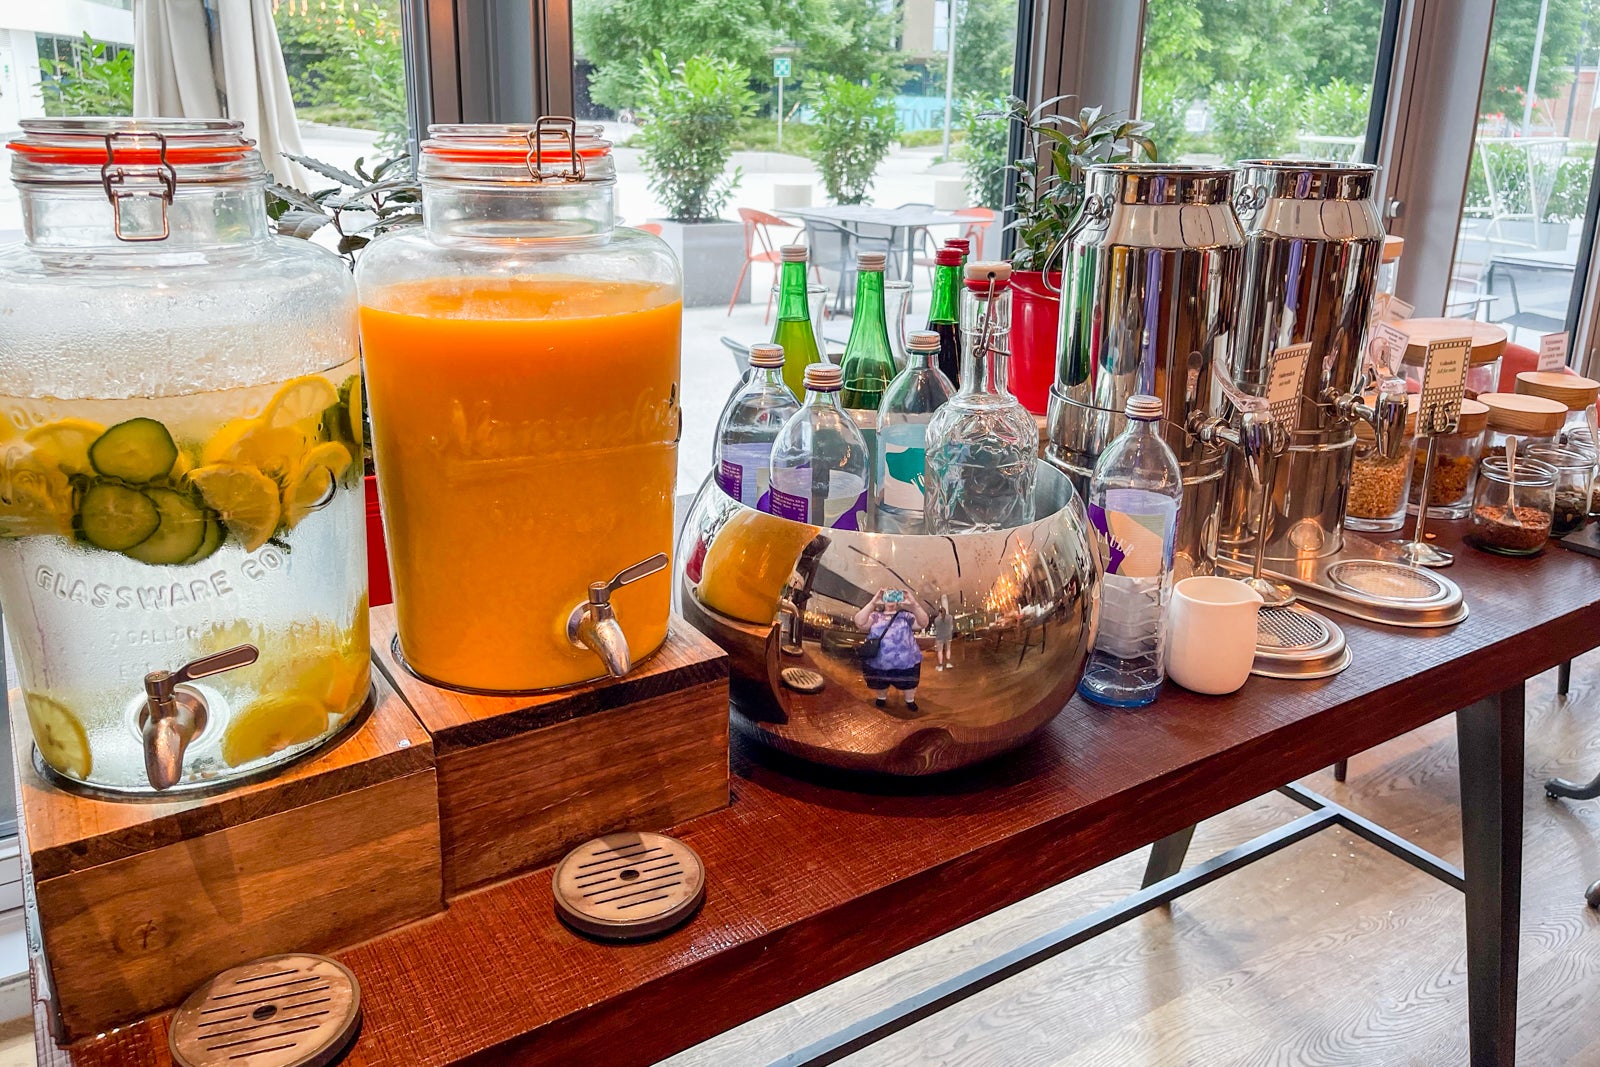 Juice and beverages at Andaz Vienna breakfast buffet